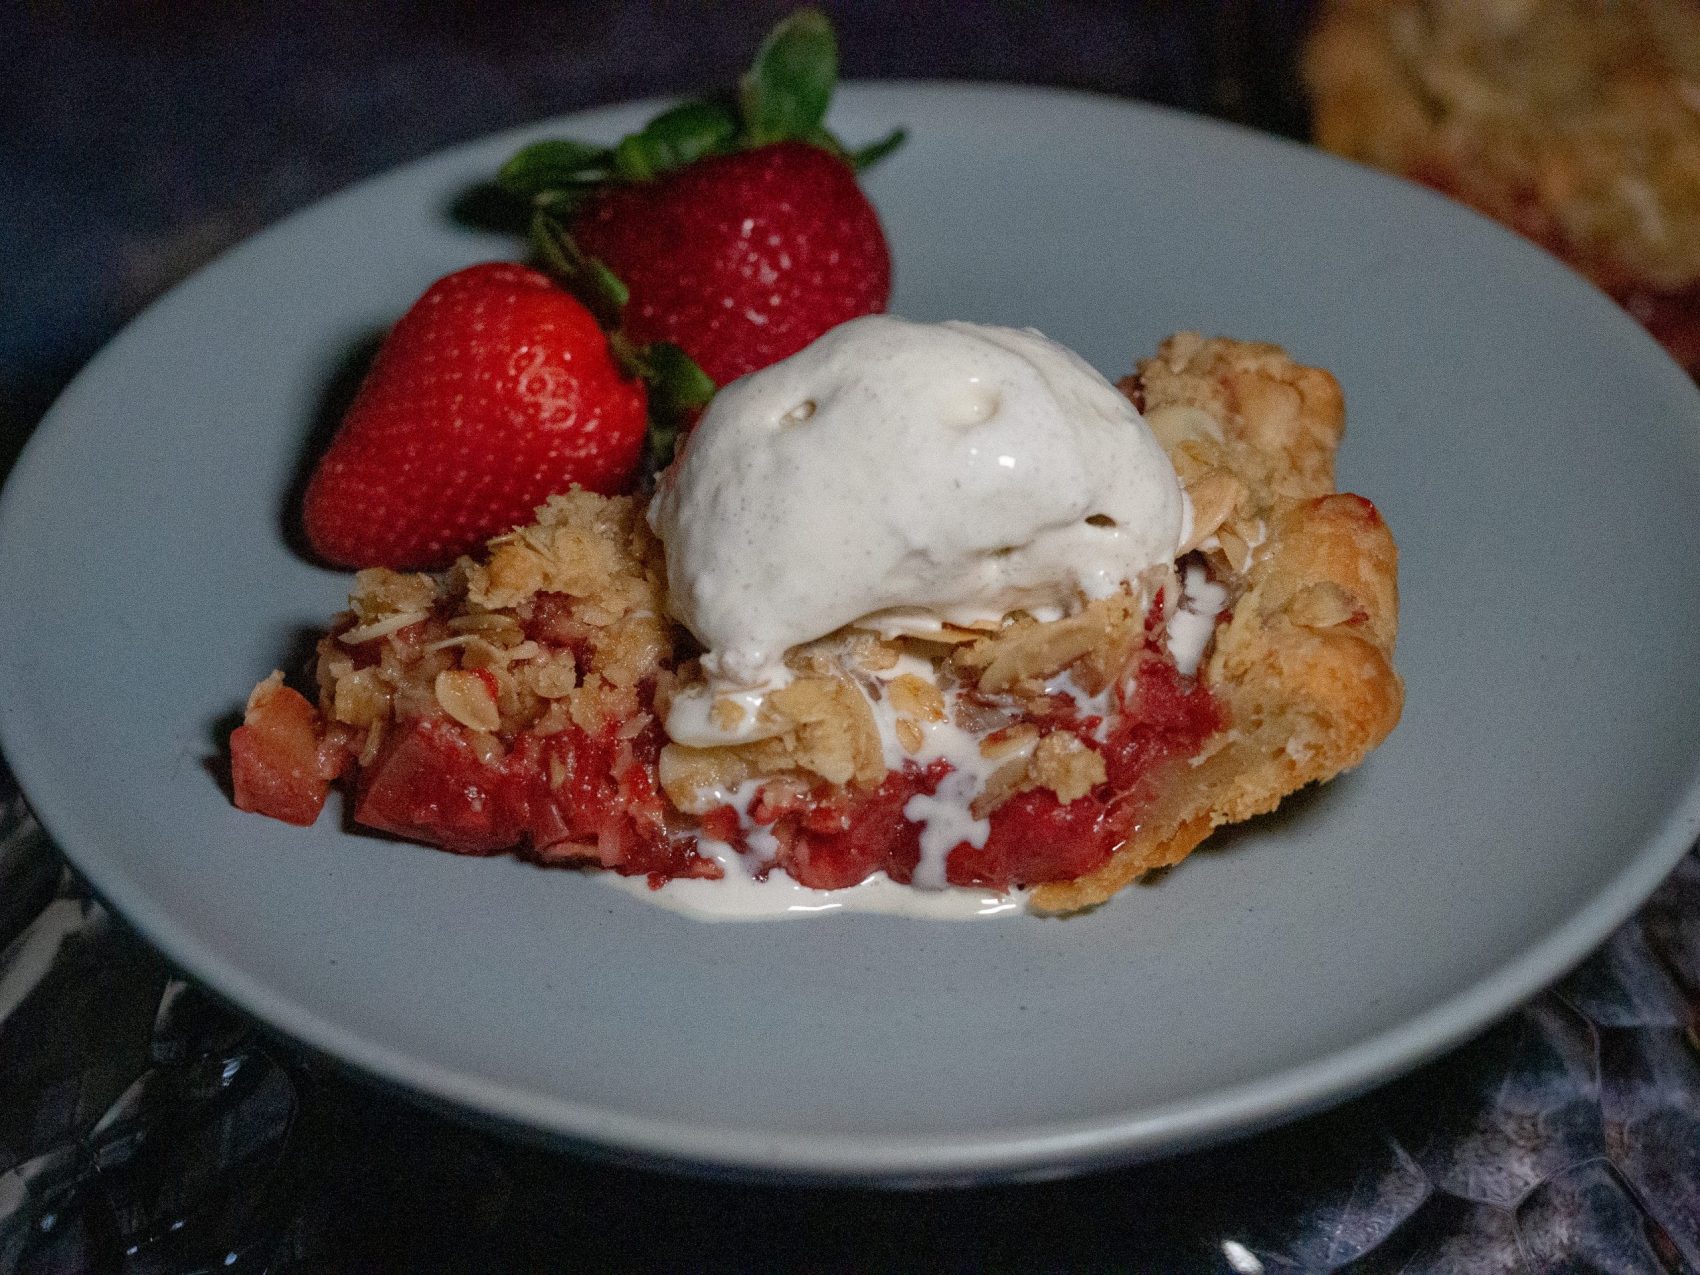 A slice of Strawberry-rhubarb pie crisp with vanilla ice cream and 2 fresh strawberries on a light blue plate